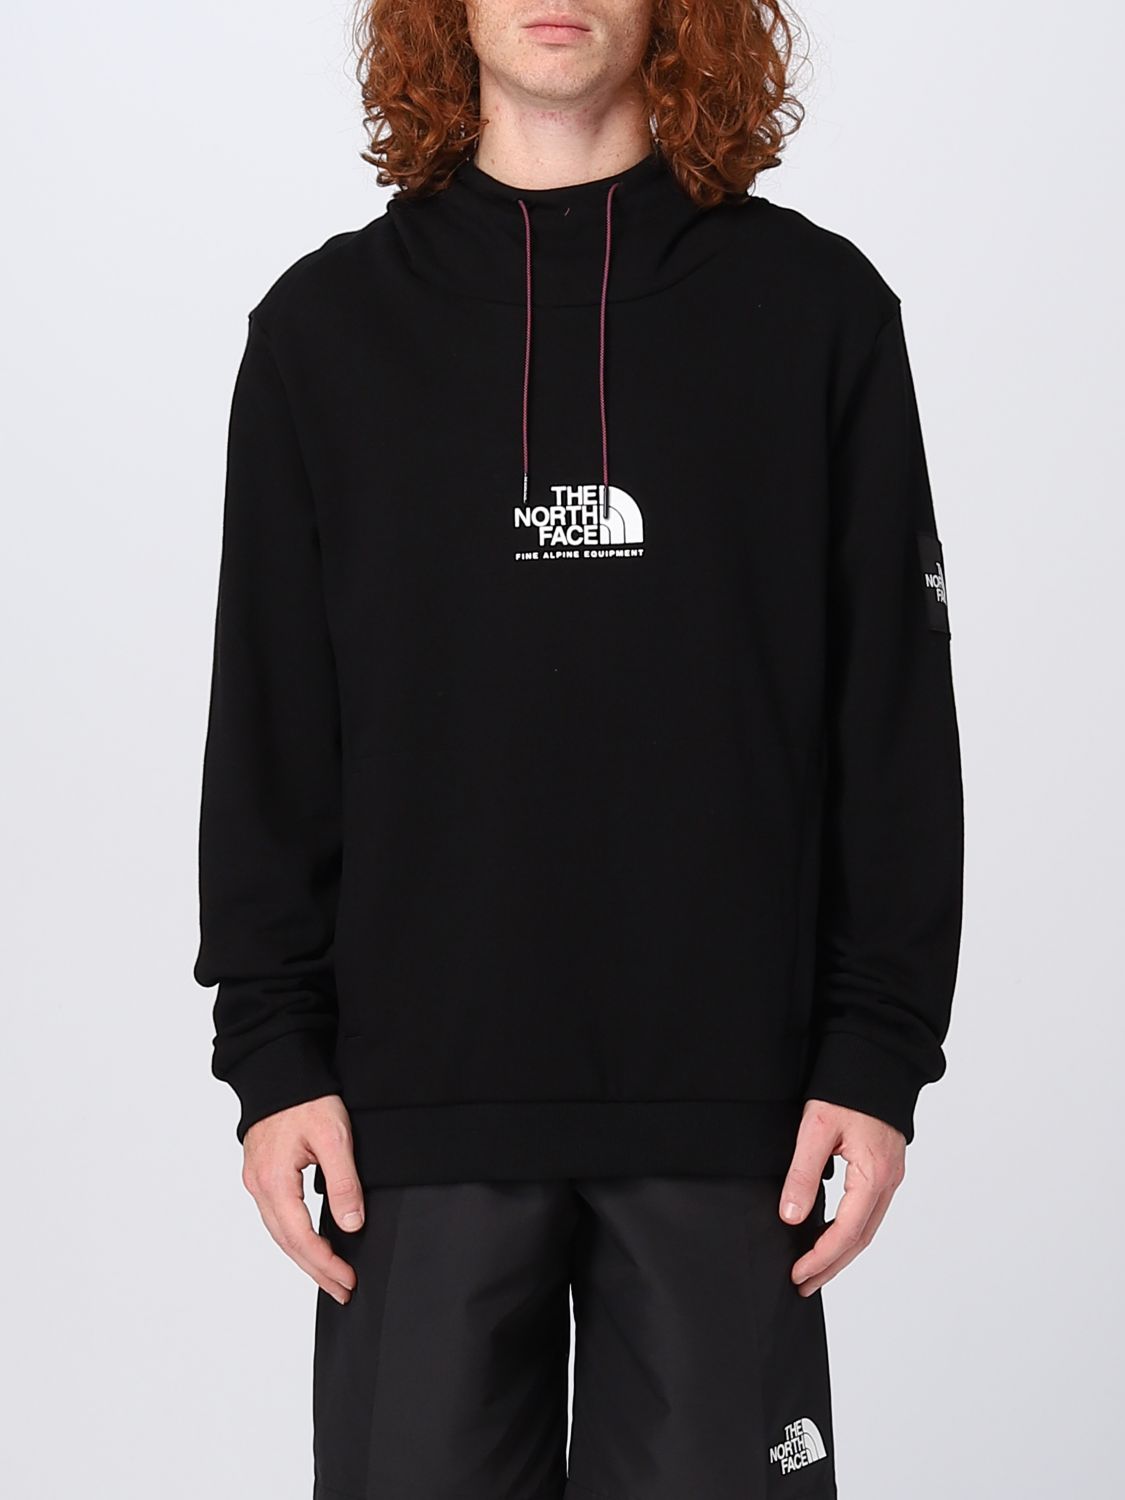 Spectaculair Op tijd Preek THE NORTH FACE: sweatshirt for man - Black | The North Face sweatshirt  NF0A3XY3 online on GIGLIO.COM